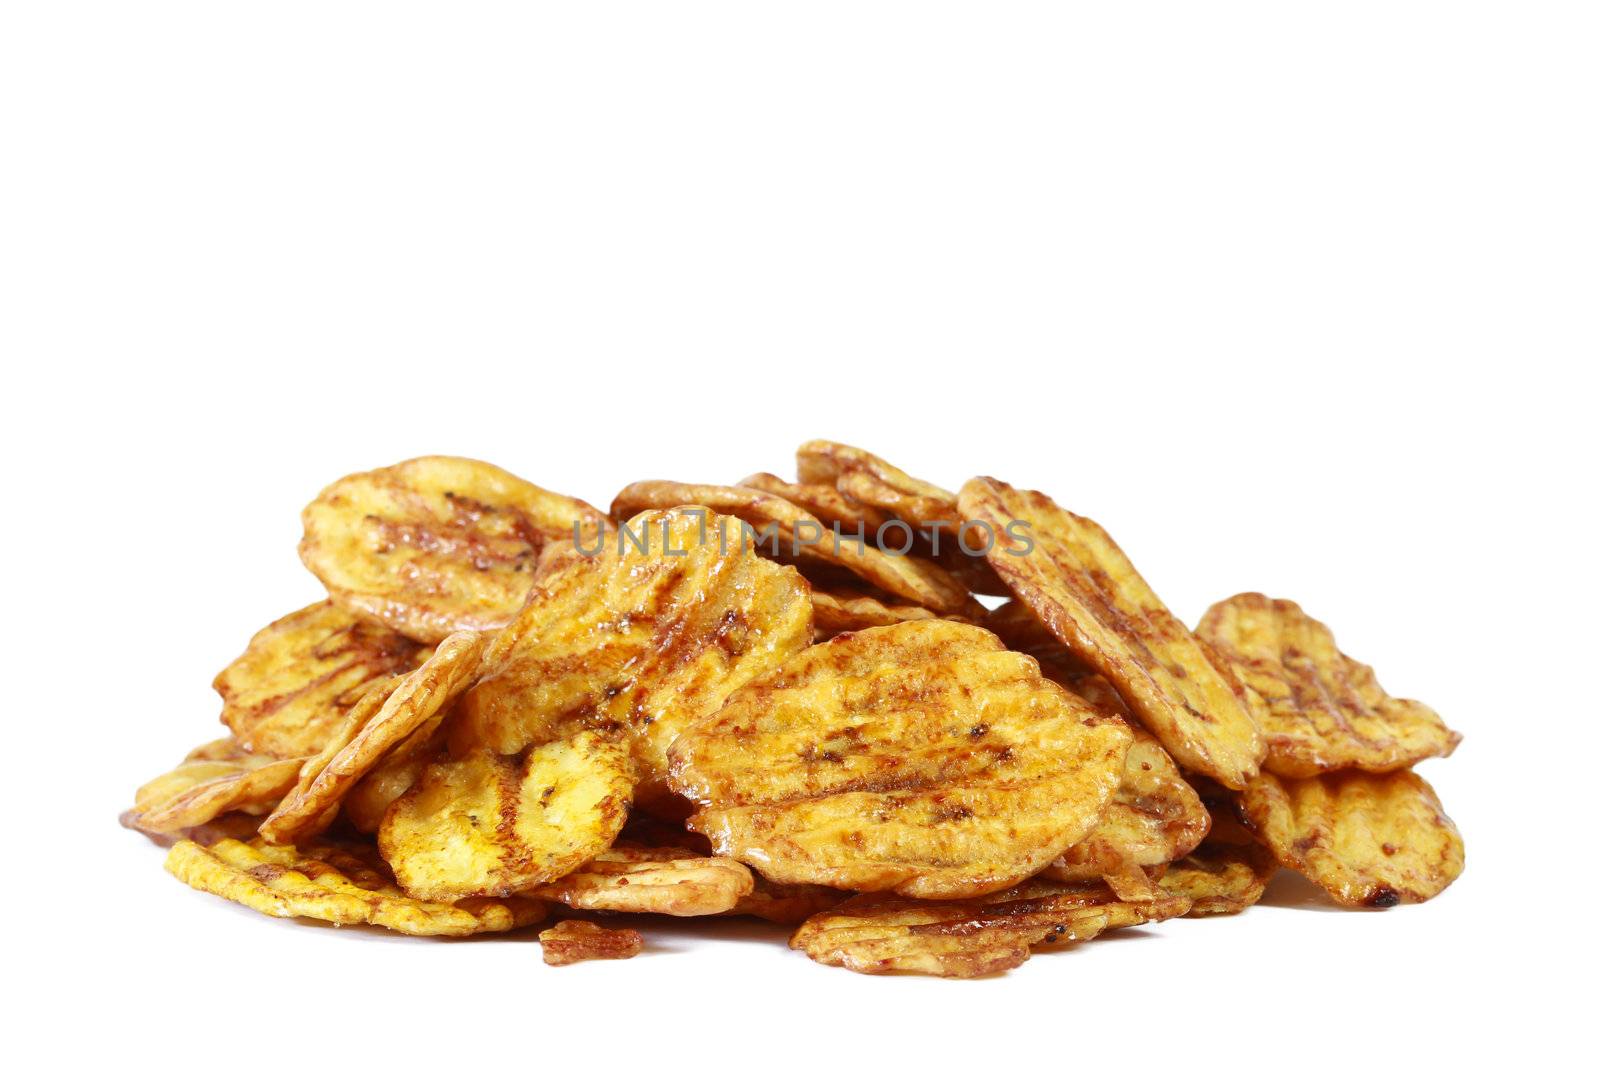 Fried thinly sliced banana chips, a tropical snack